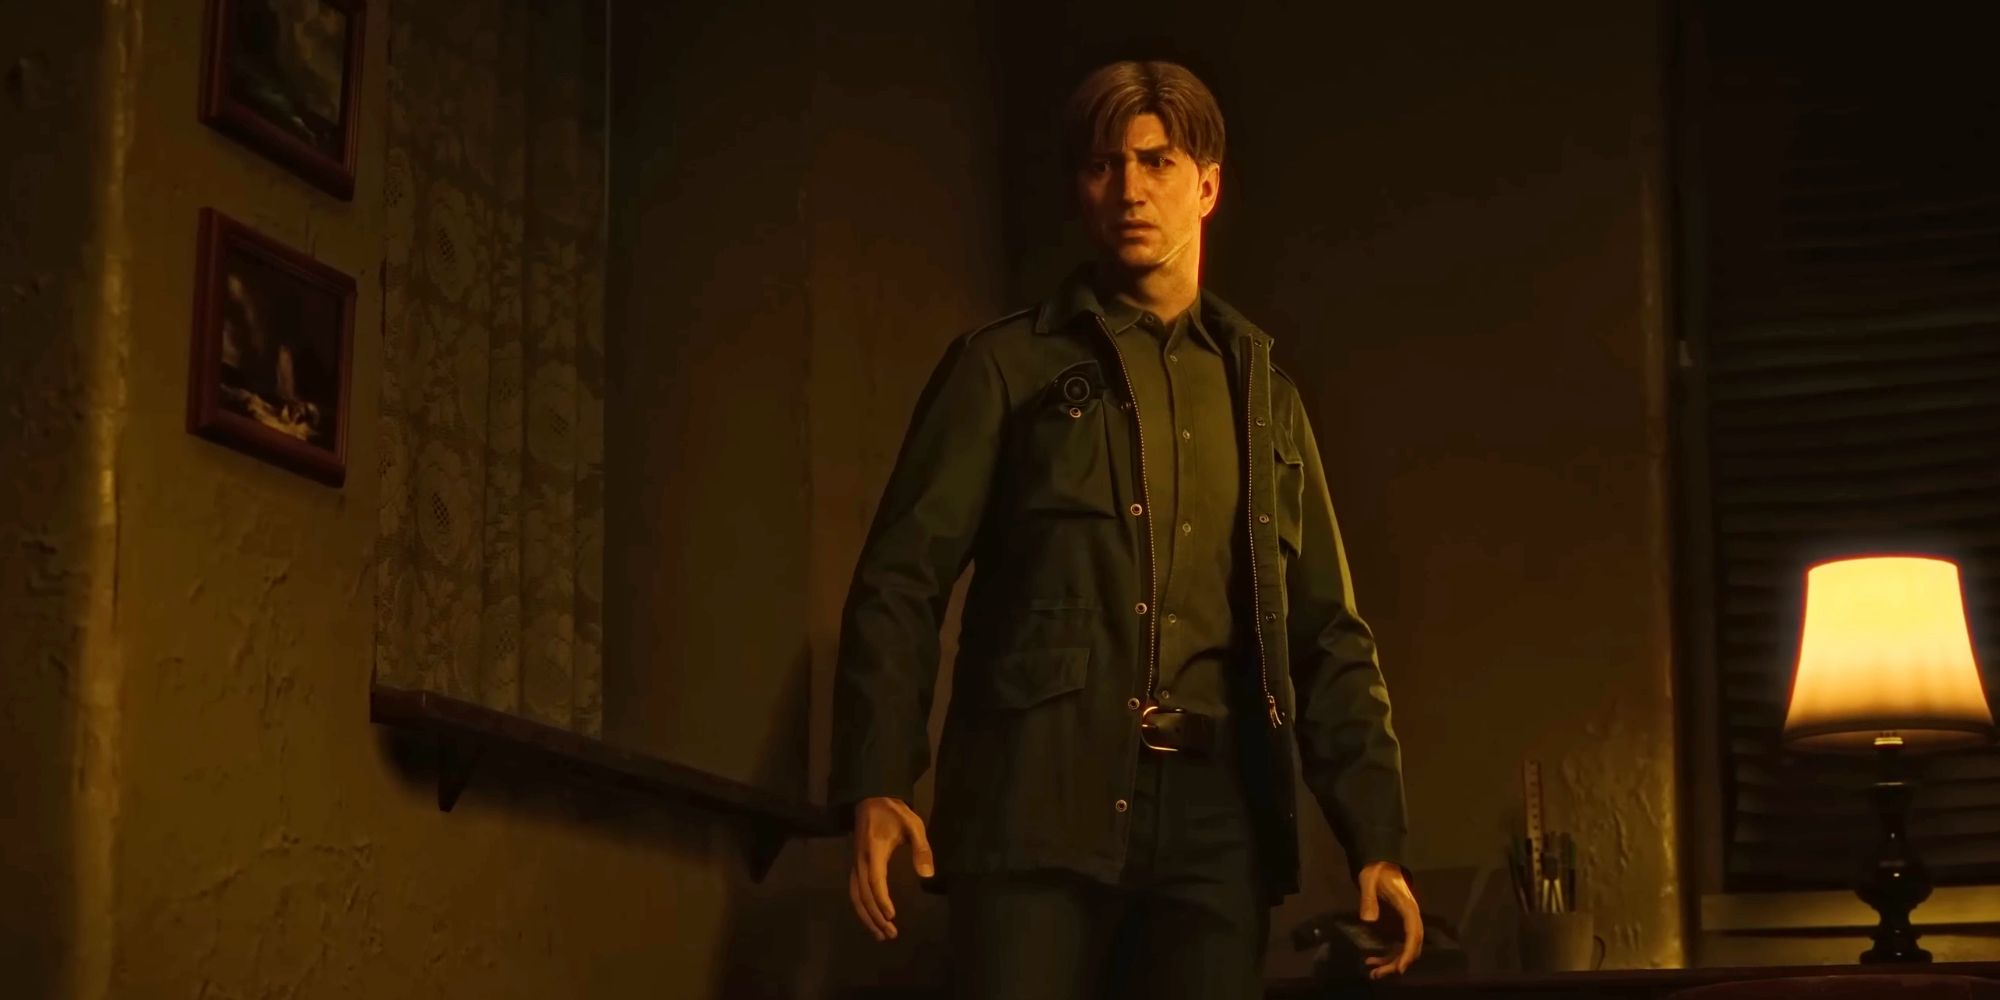 James from the Silent Hill 2 remake standing in a dimly lit room looking concerned.